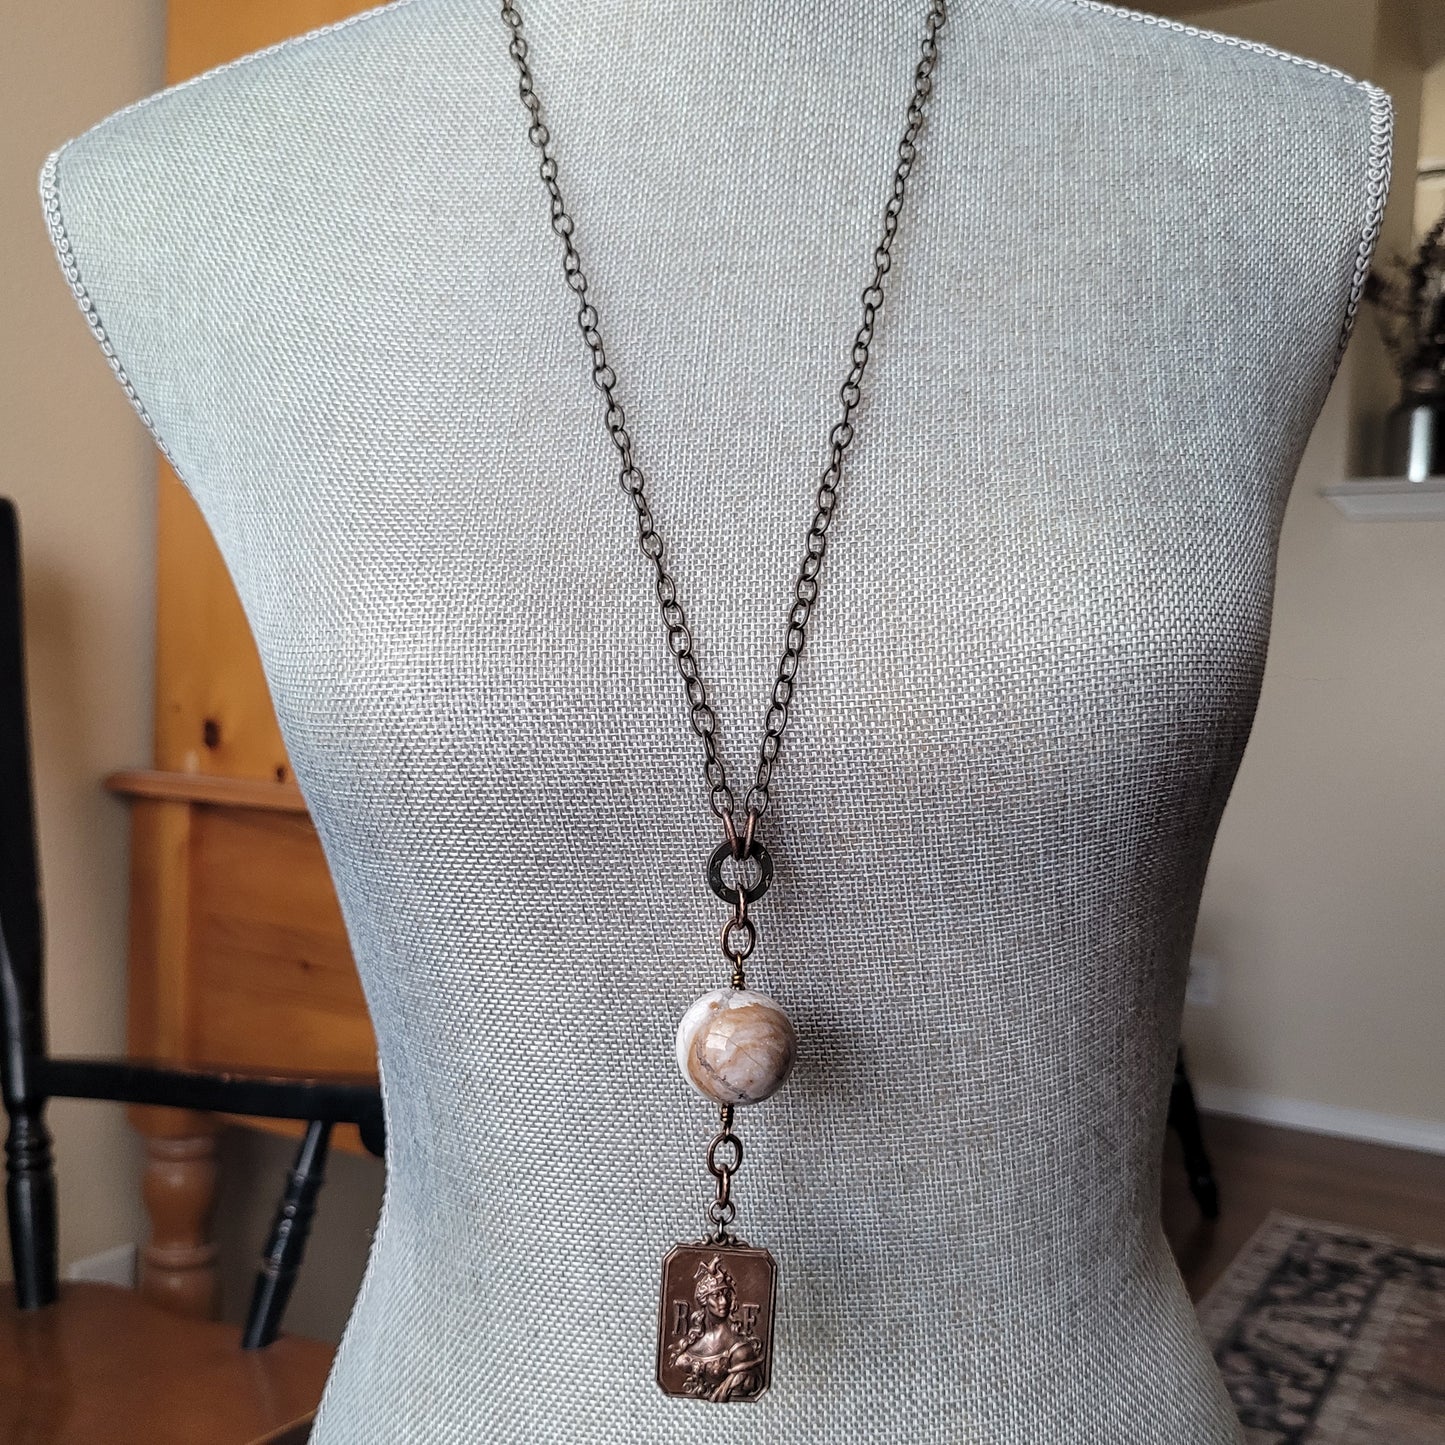 Owyhee Jasper with 1919 French Army medal necklace